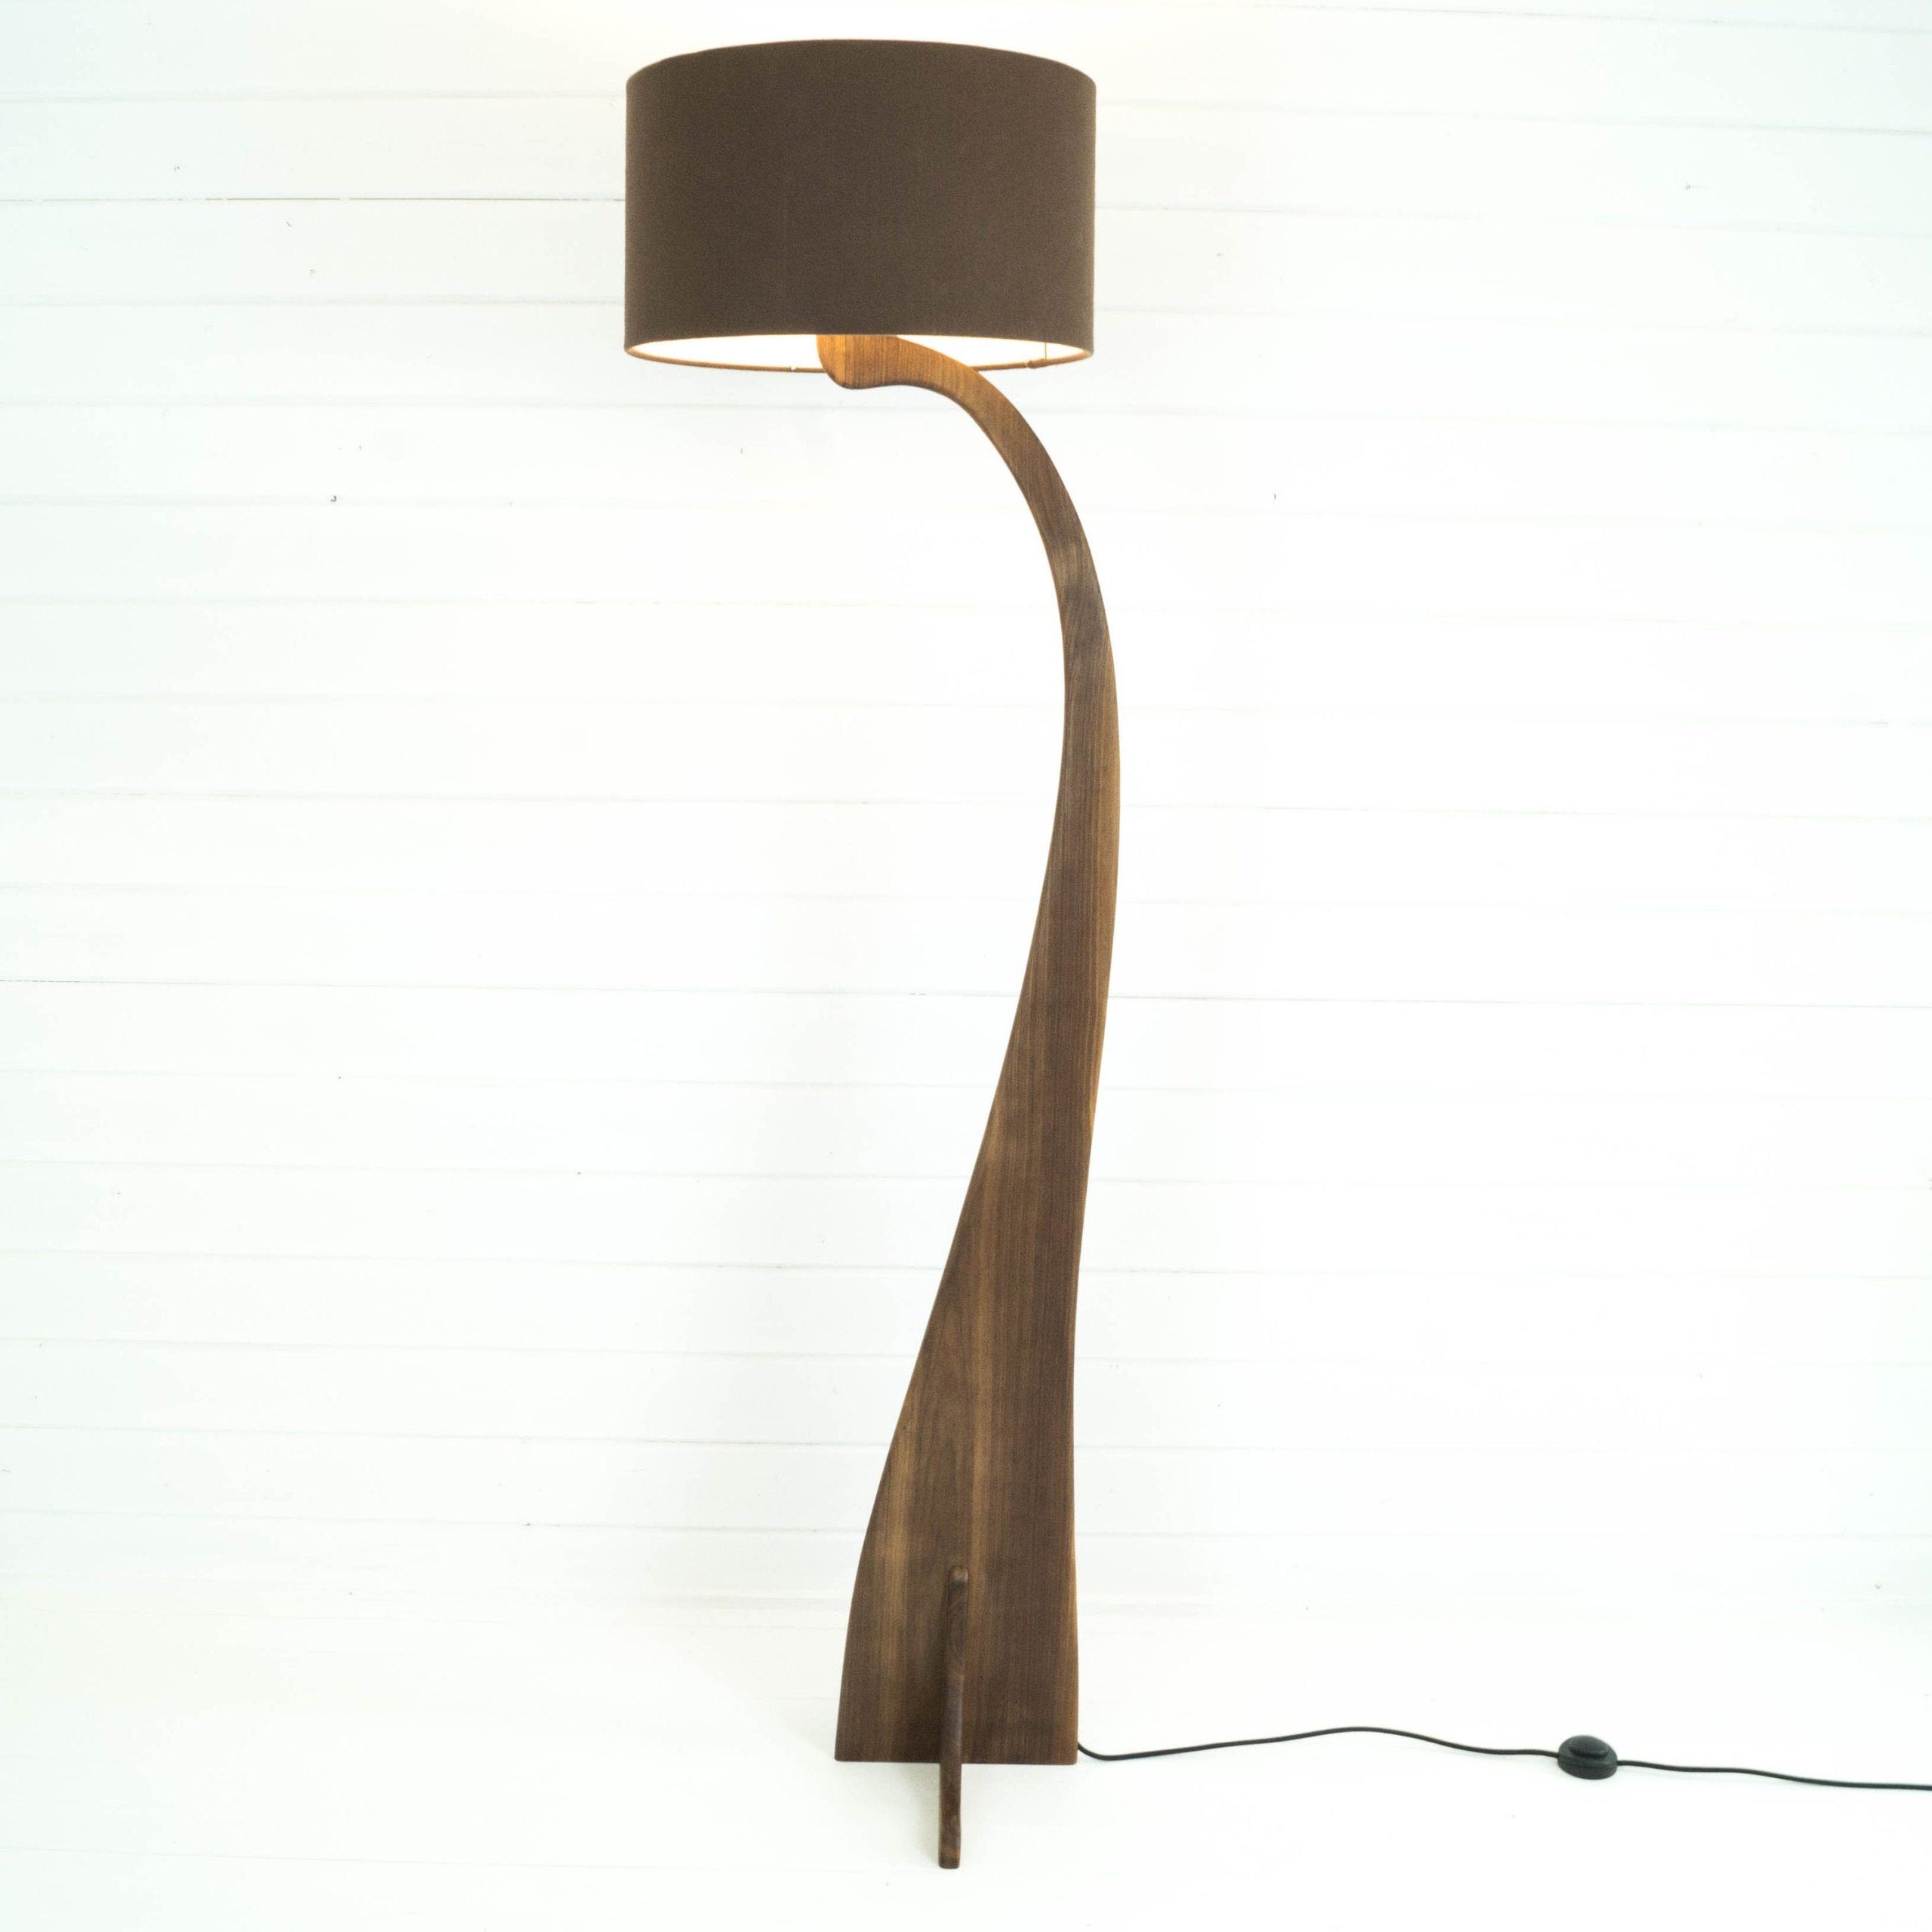 Walnut Floor Lamp Solid Wood Unique Contemporary Design – Etsy Uk Intended For Walnut Floor Lamps (View 3 of 15)